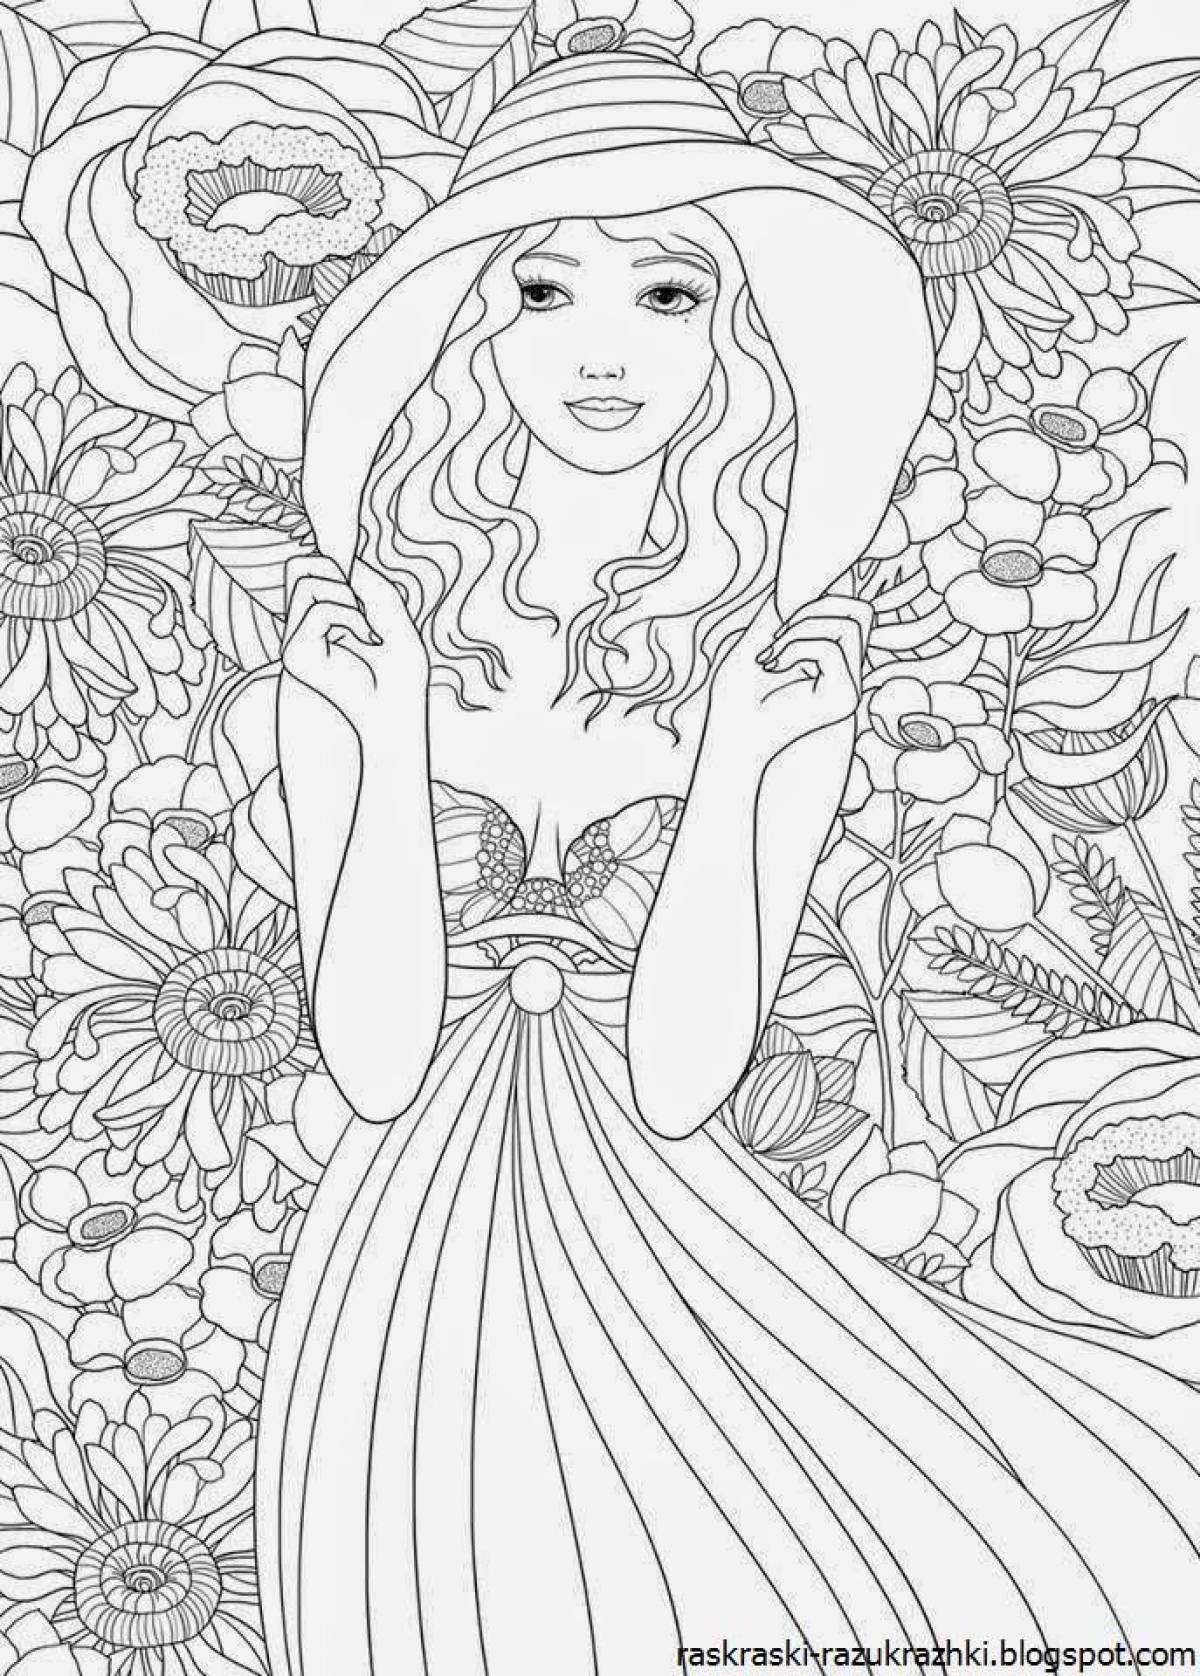 Coloring book for girls 8 years old